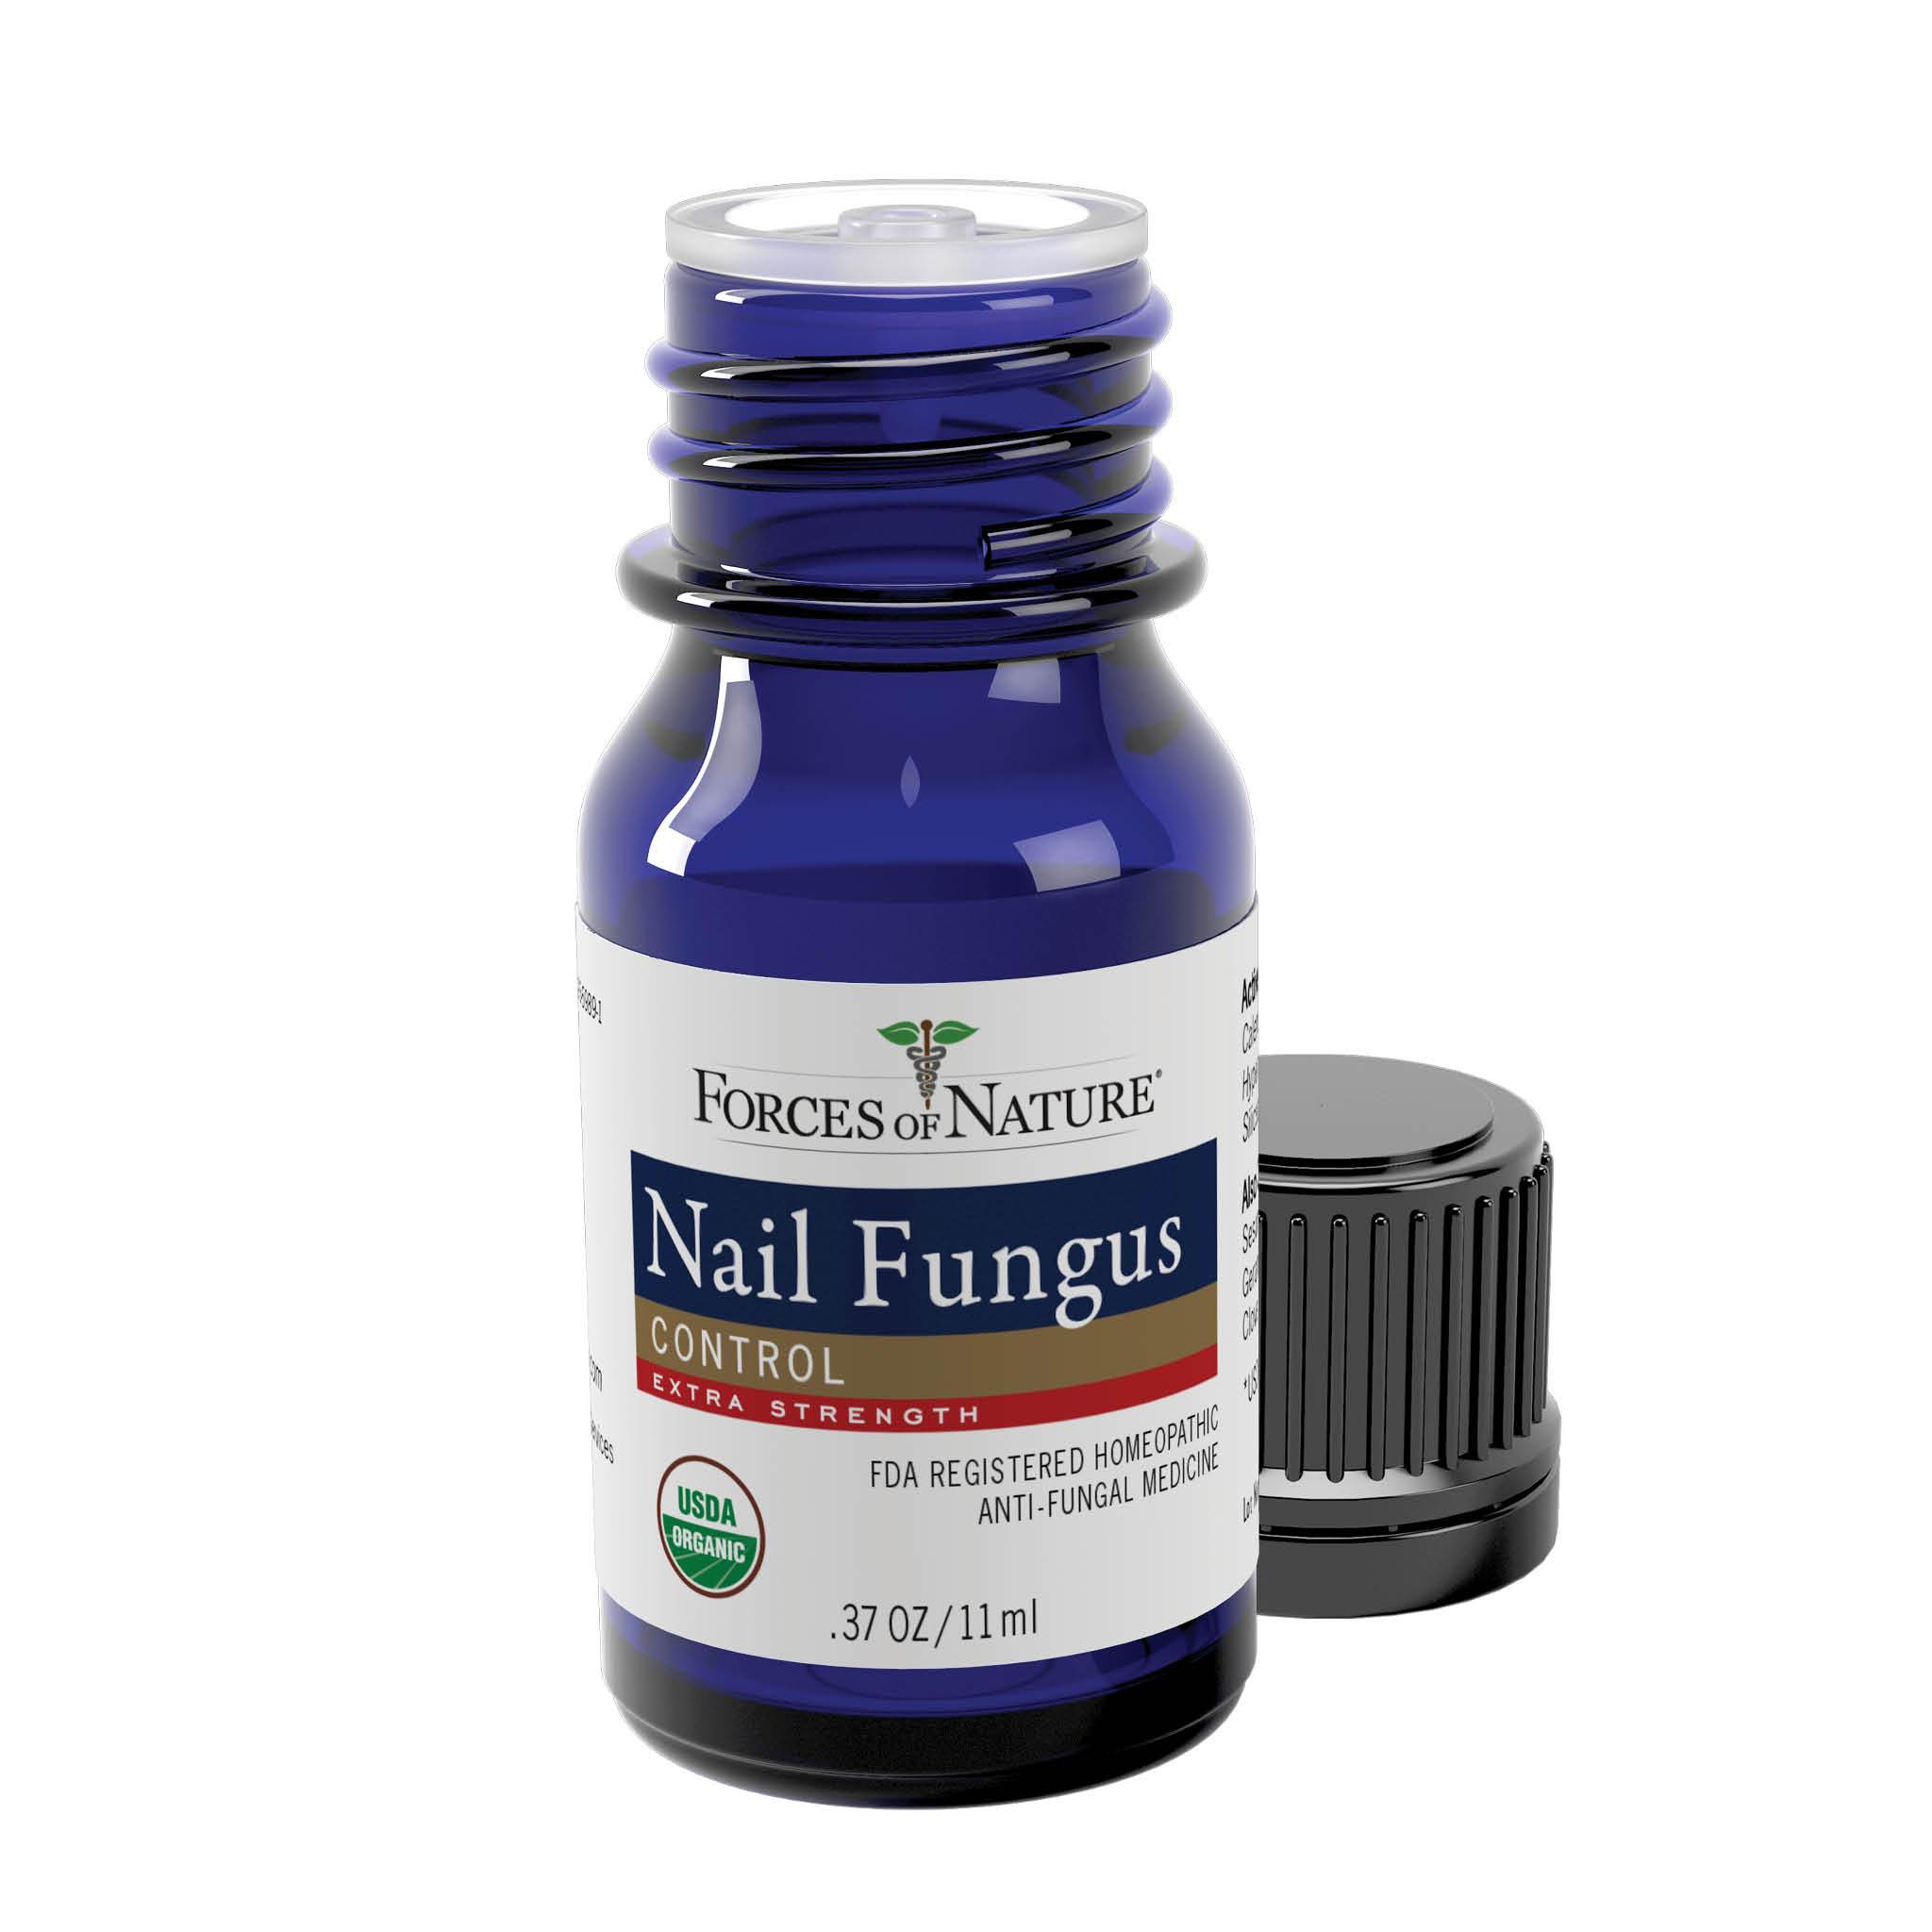 2021 Fungal Nail Treatment Highly Effective Kill Nail Fungus For Best  Result UK | eBay